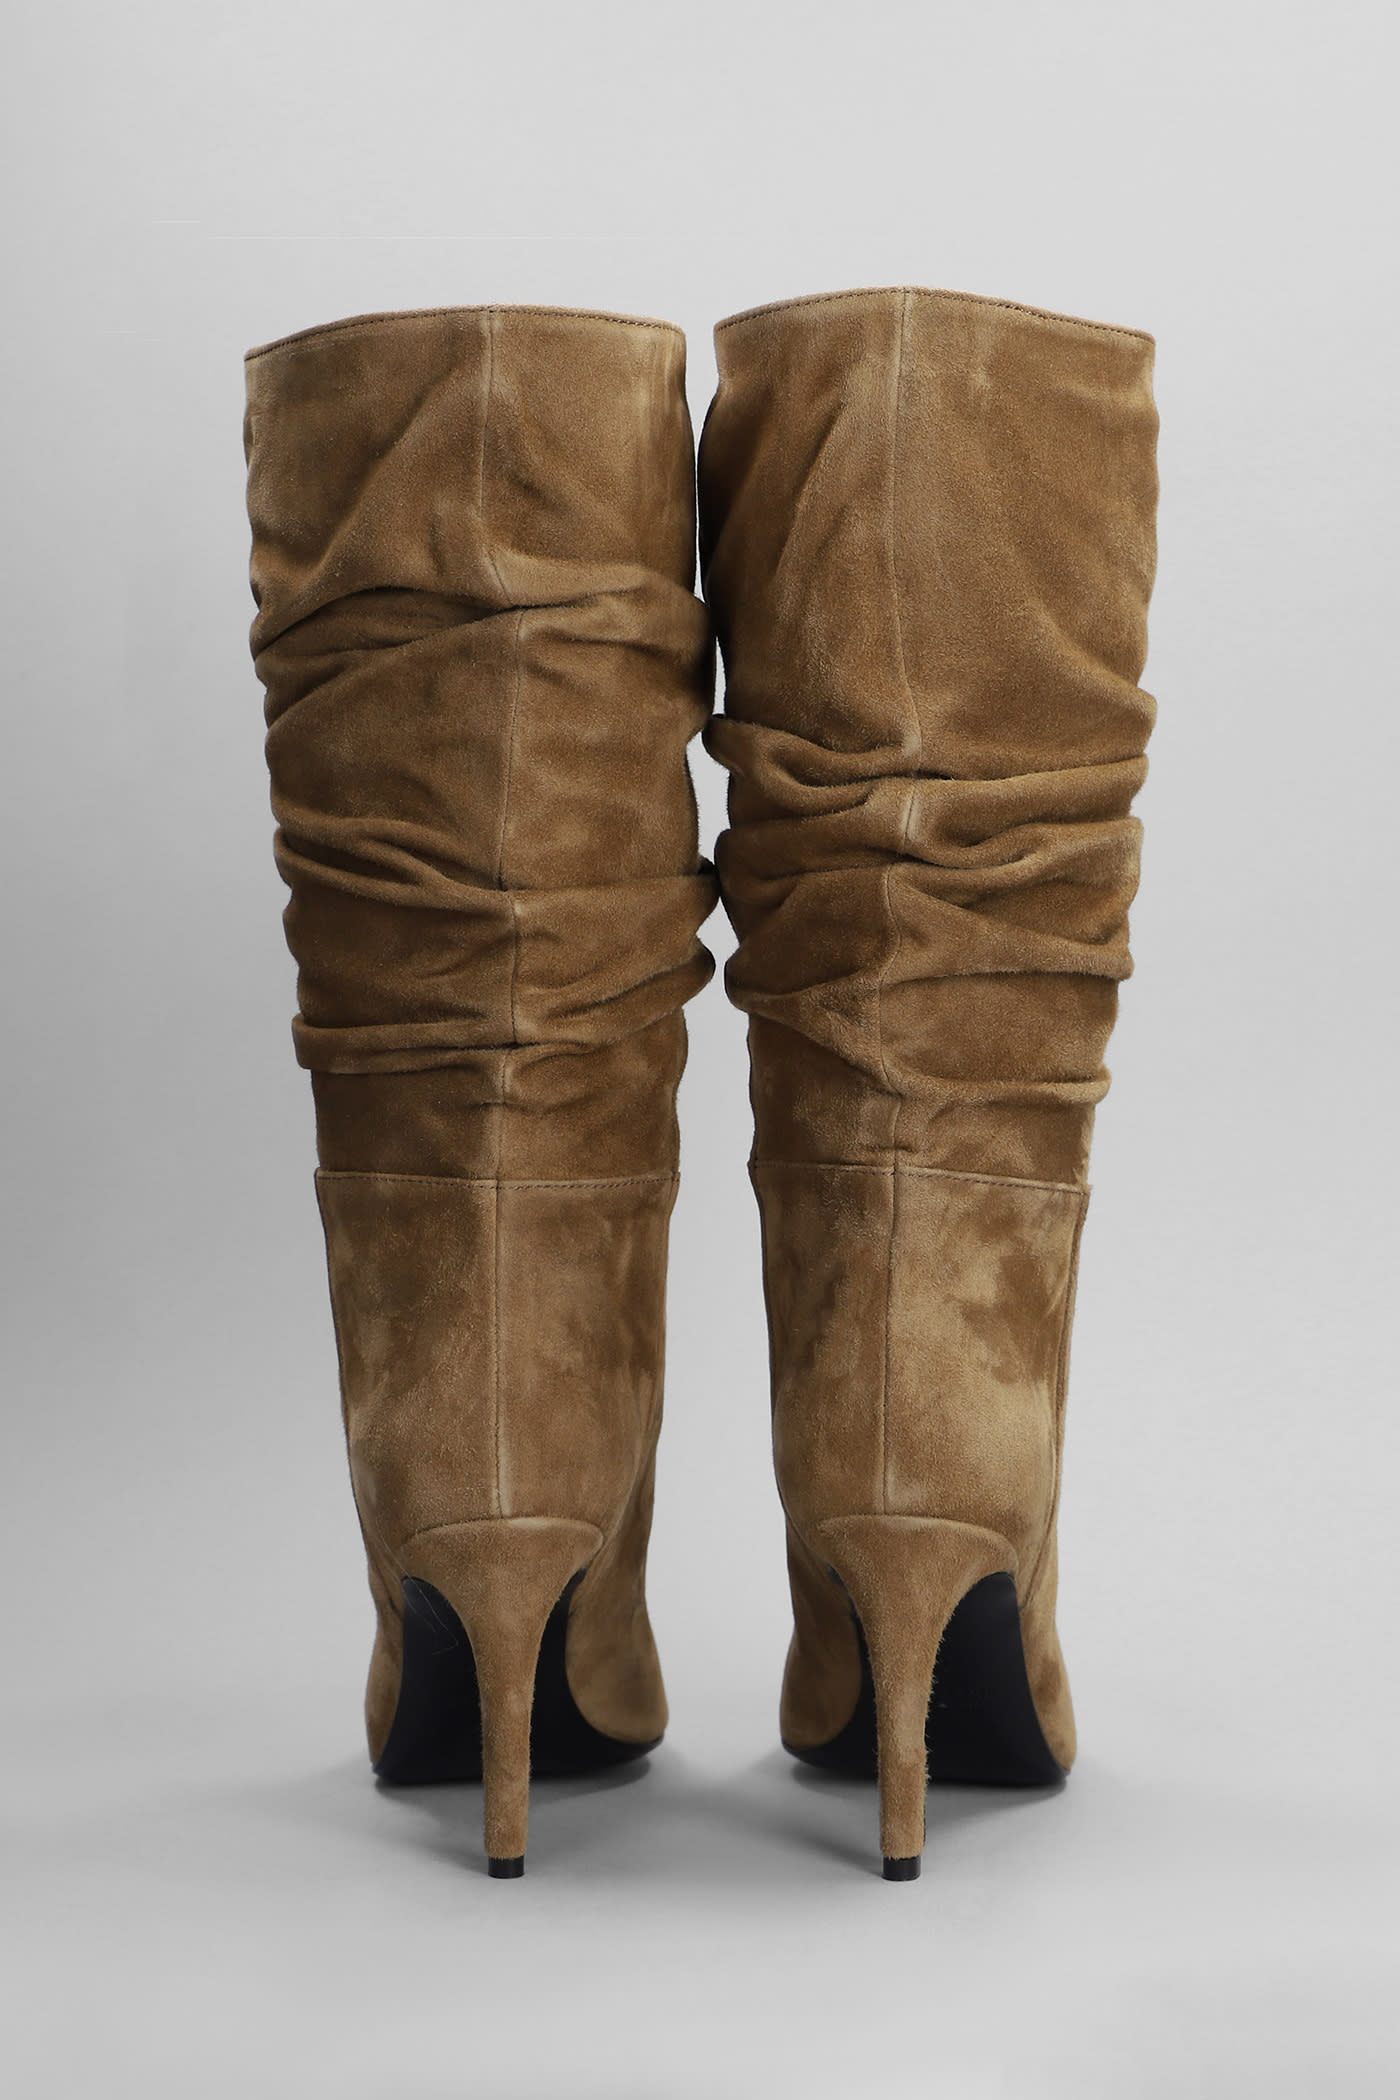 Shop Via Roma 15 High Heels Boots In Brown Suede